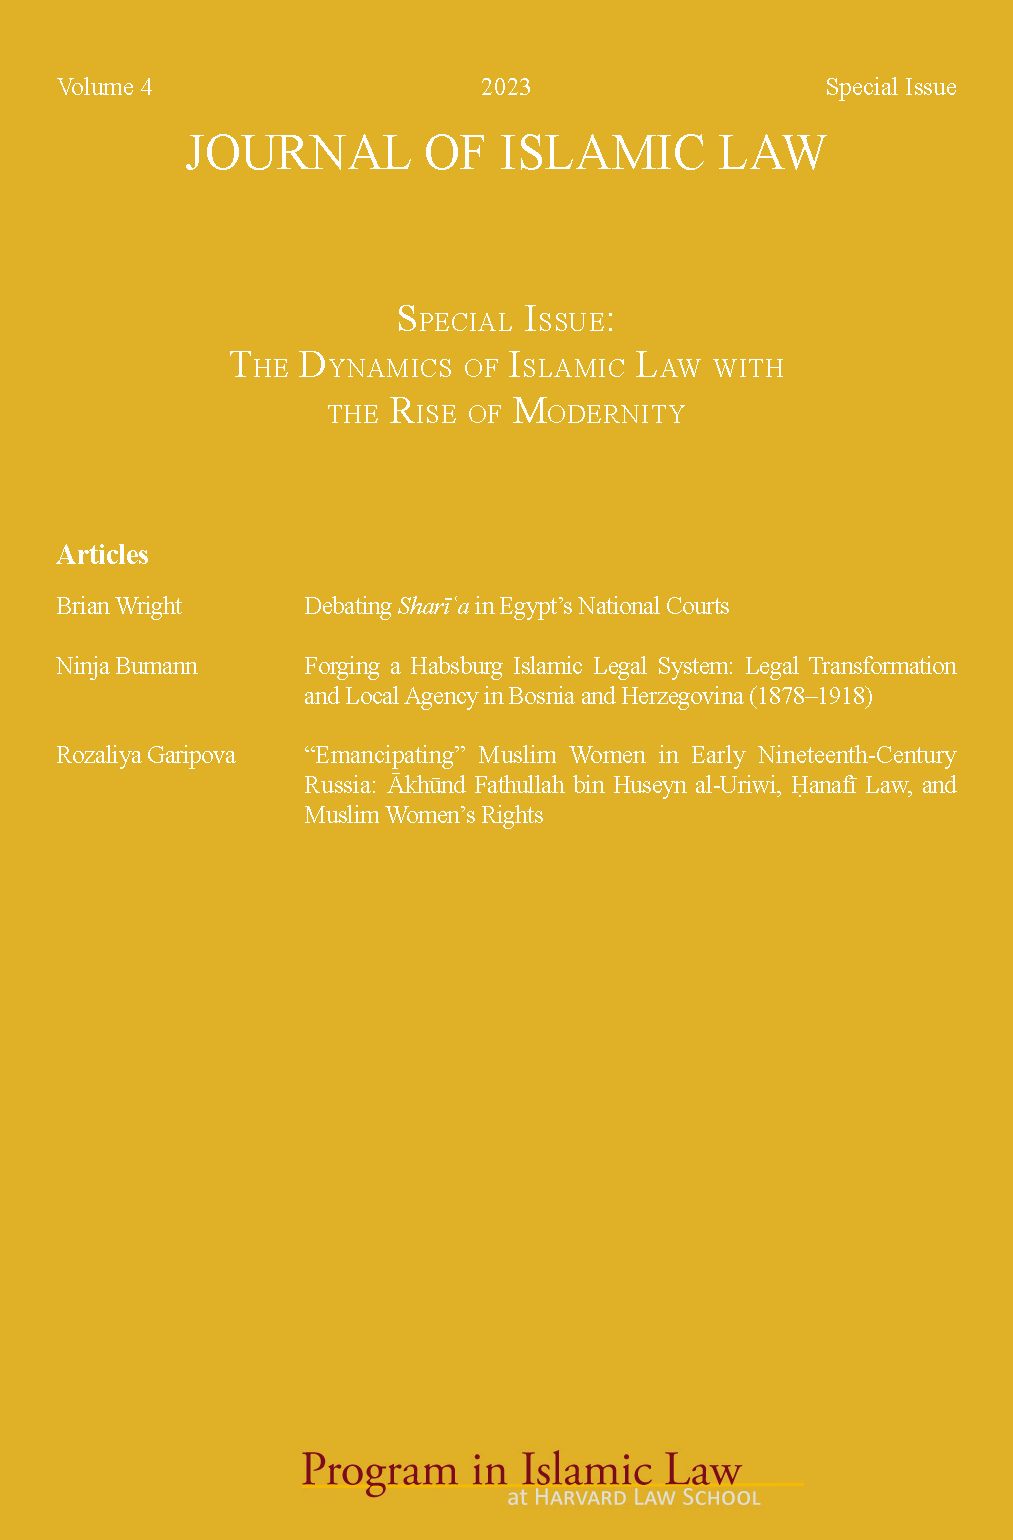 Journal of Islamic Law, Vol 4, 2023: Special Issue - The Dynamics of Islamic Law with the Rise of Modernity